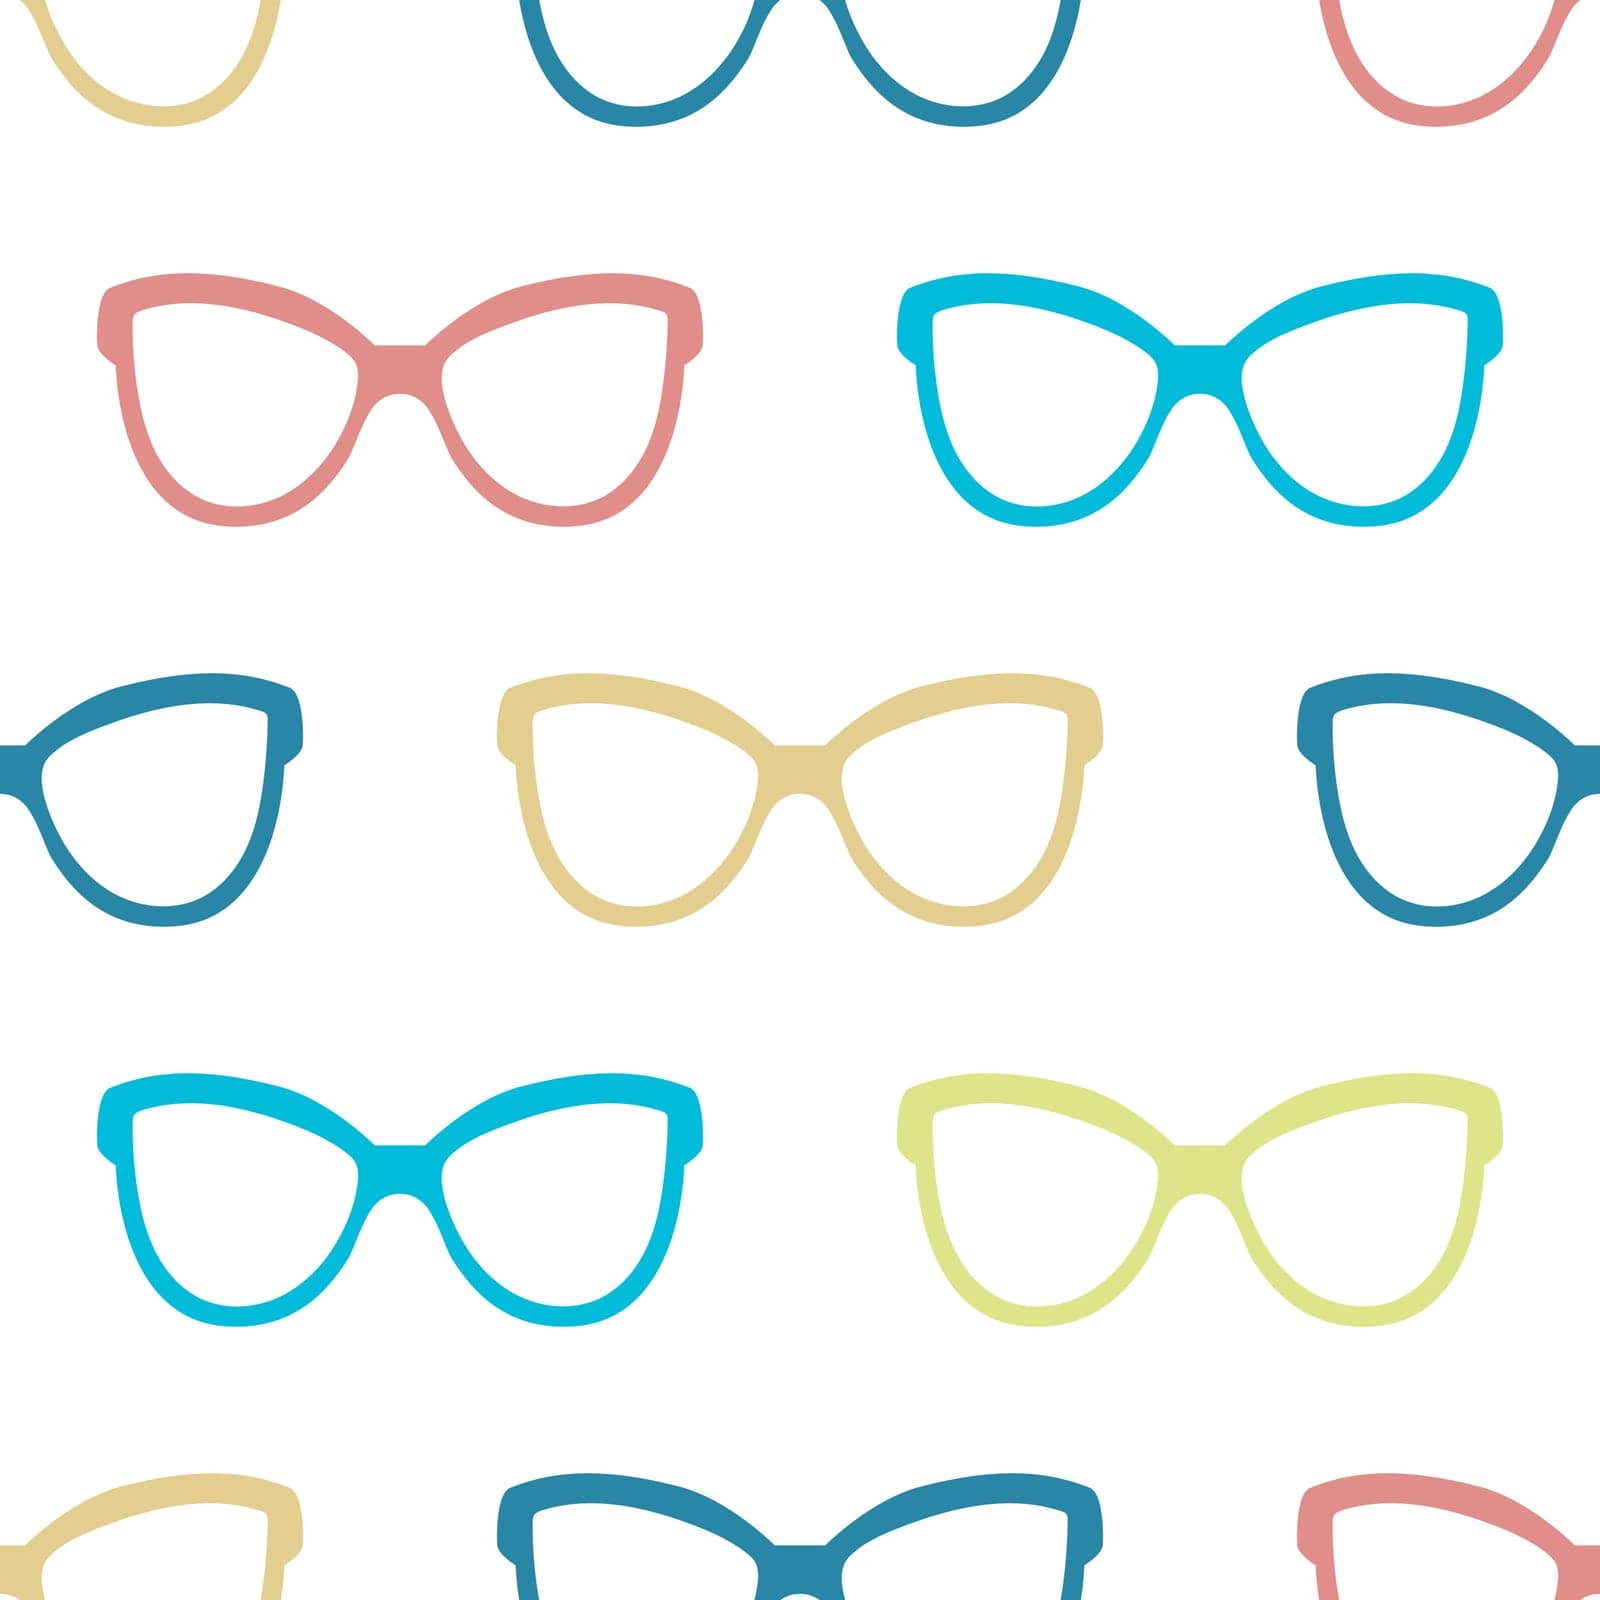 Child colored glasses seamless pattern. Background glasses with blue, yellow, red, green frames. Continuous print for design, vector illustration